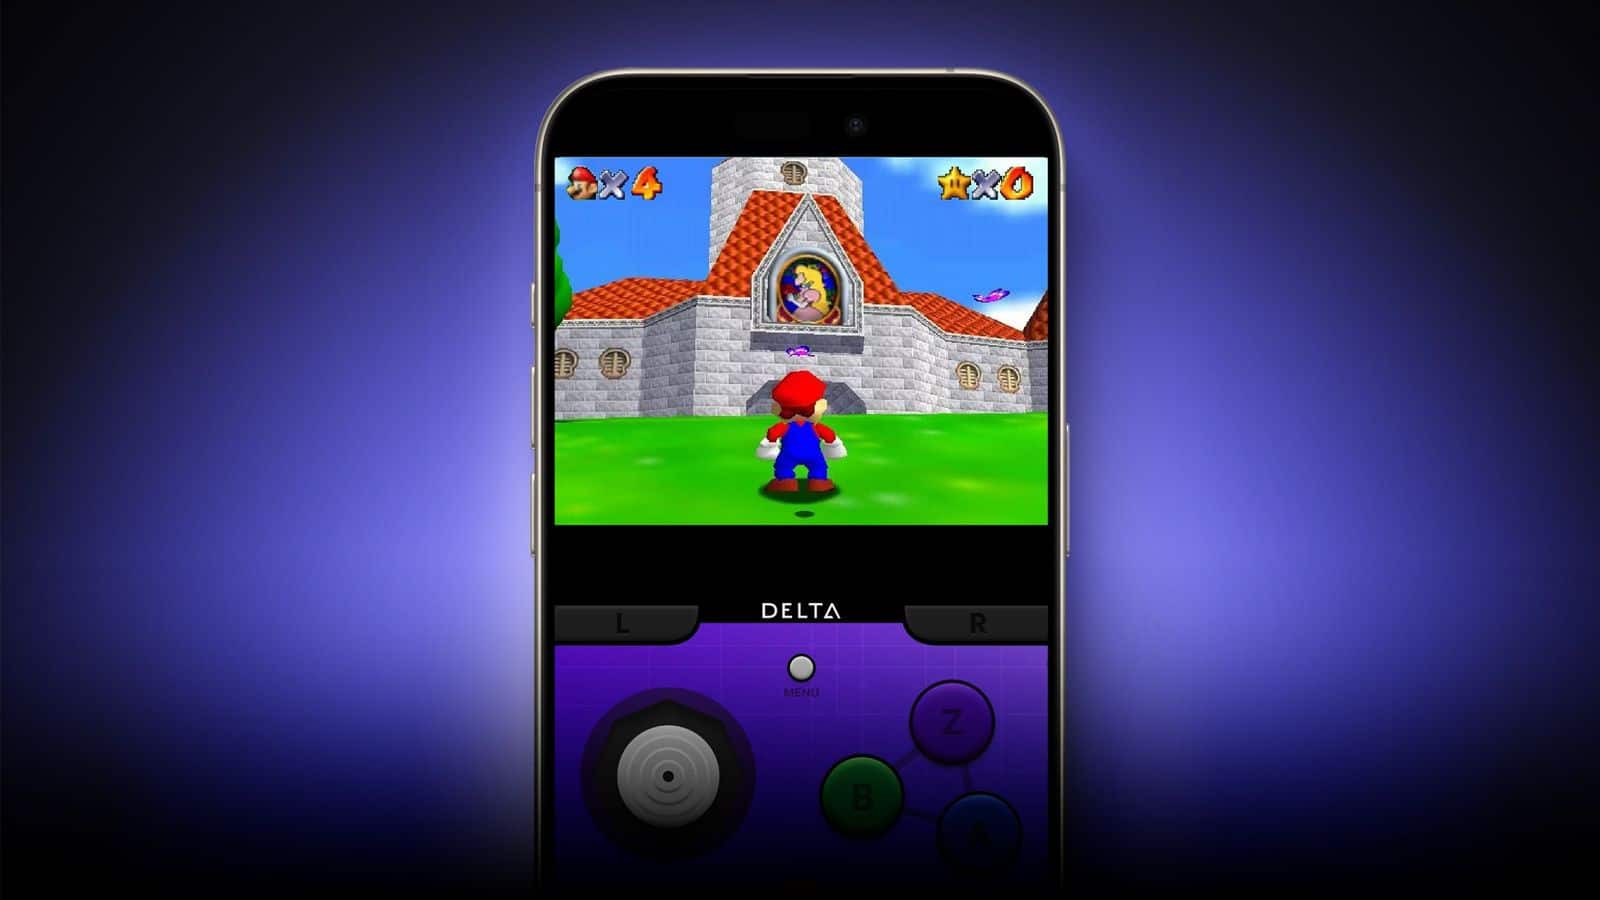 Play Nintendo games on iPhones without sideloading: Here's how